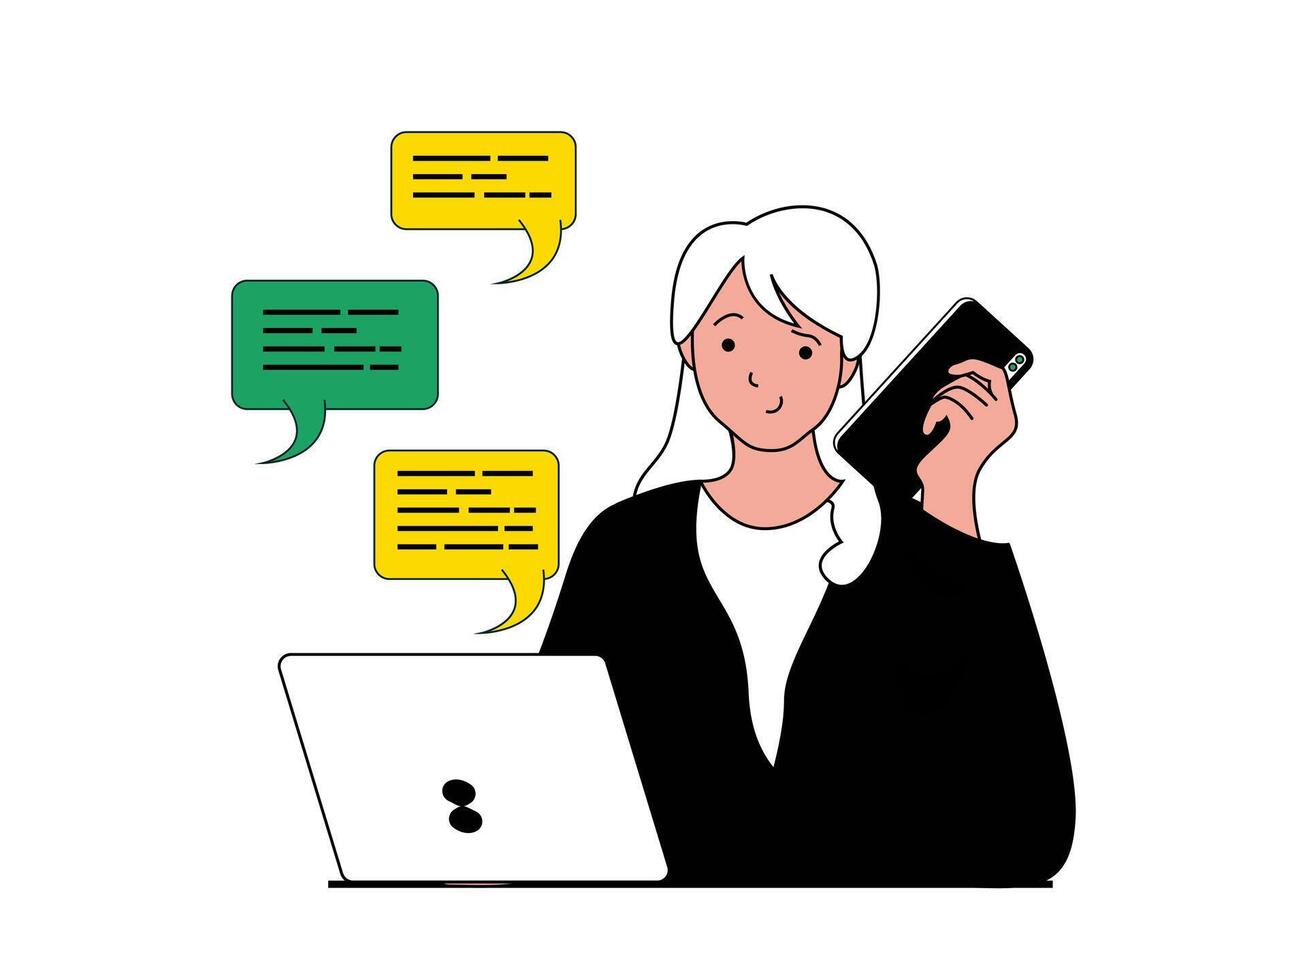 Productivity workplace concept with character situation. Woman chats online with employees, calls on phone and controls work processes. Vector illustration with people scene in flat design for web